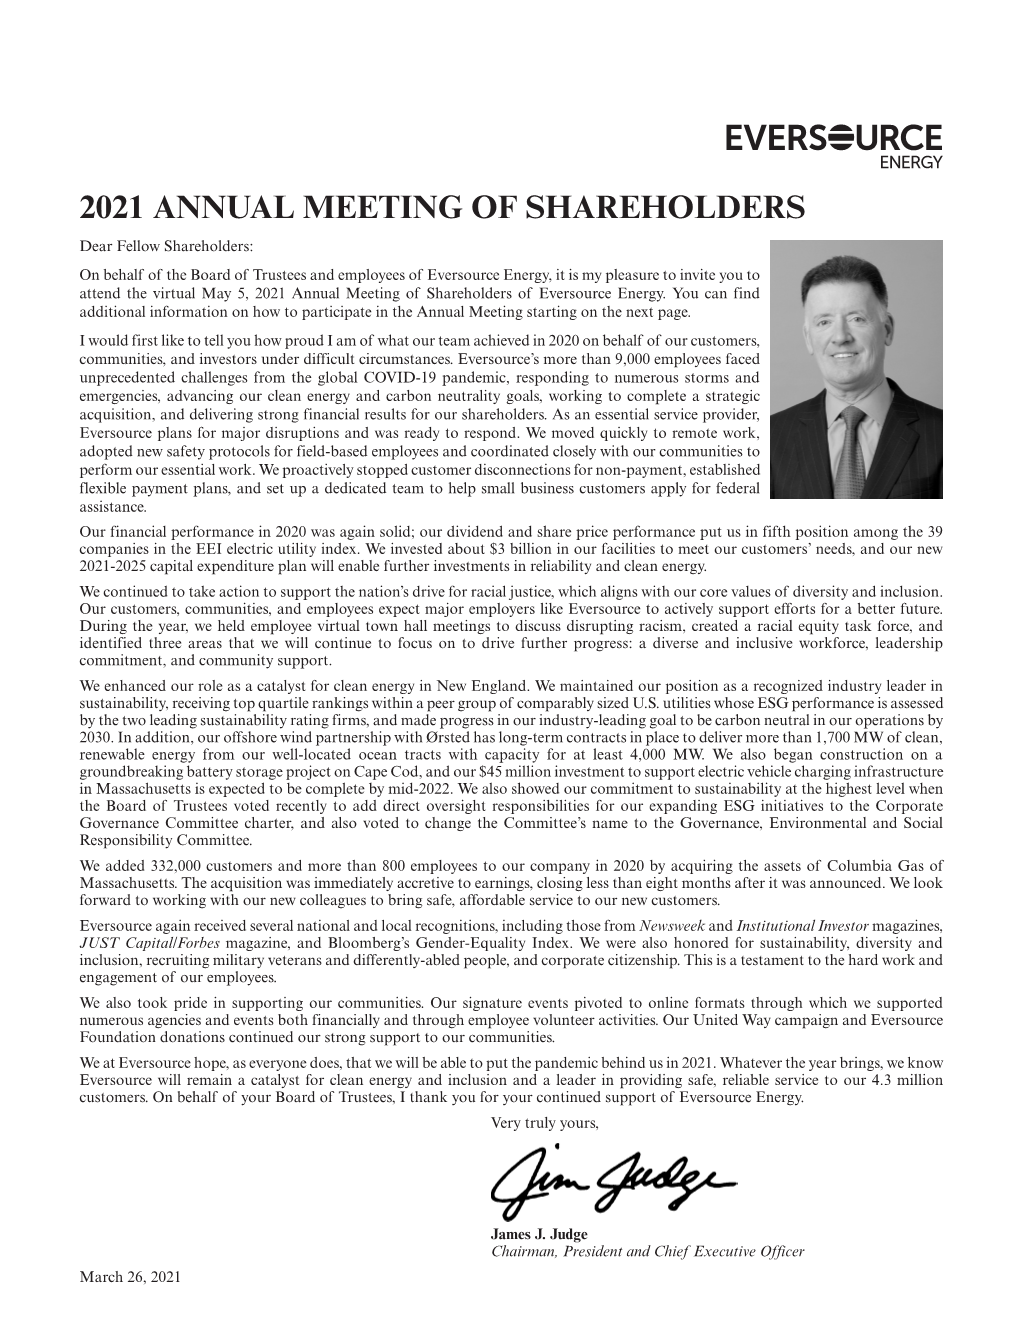 2021 Annual Meeting of Shareholders